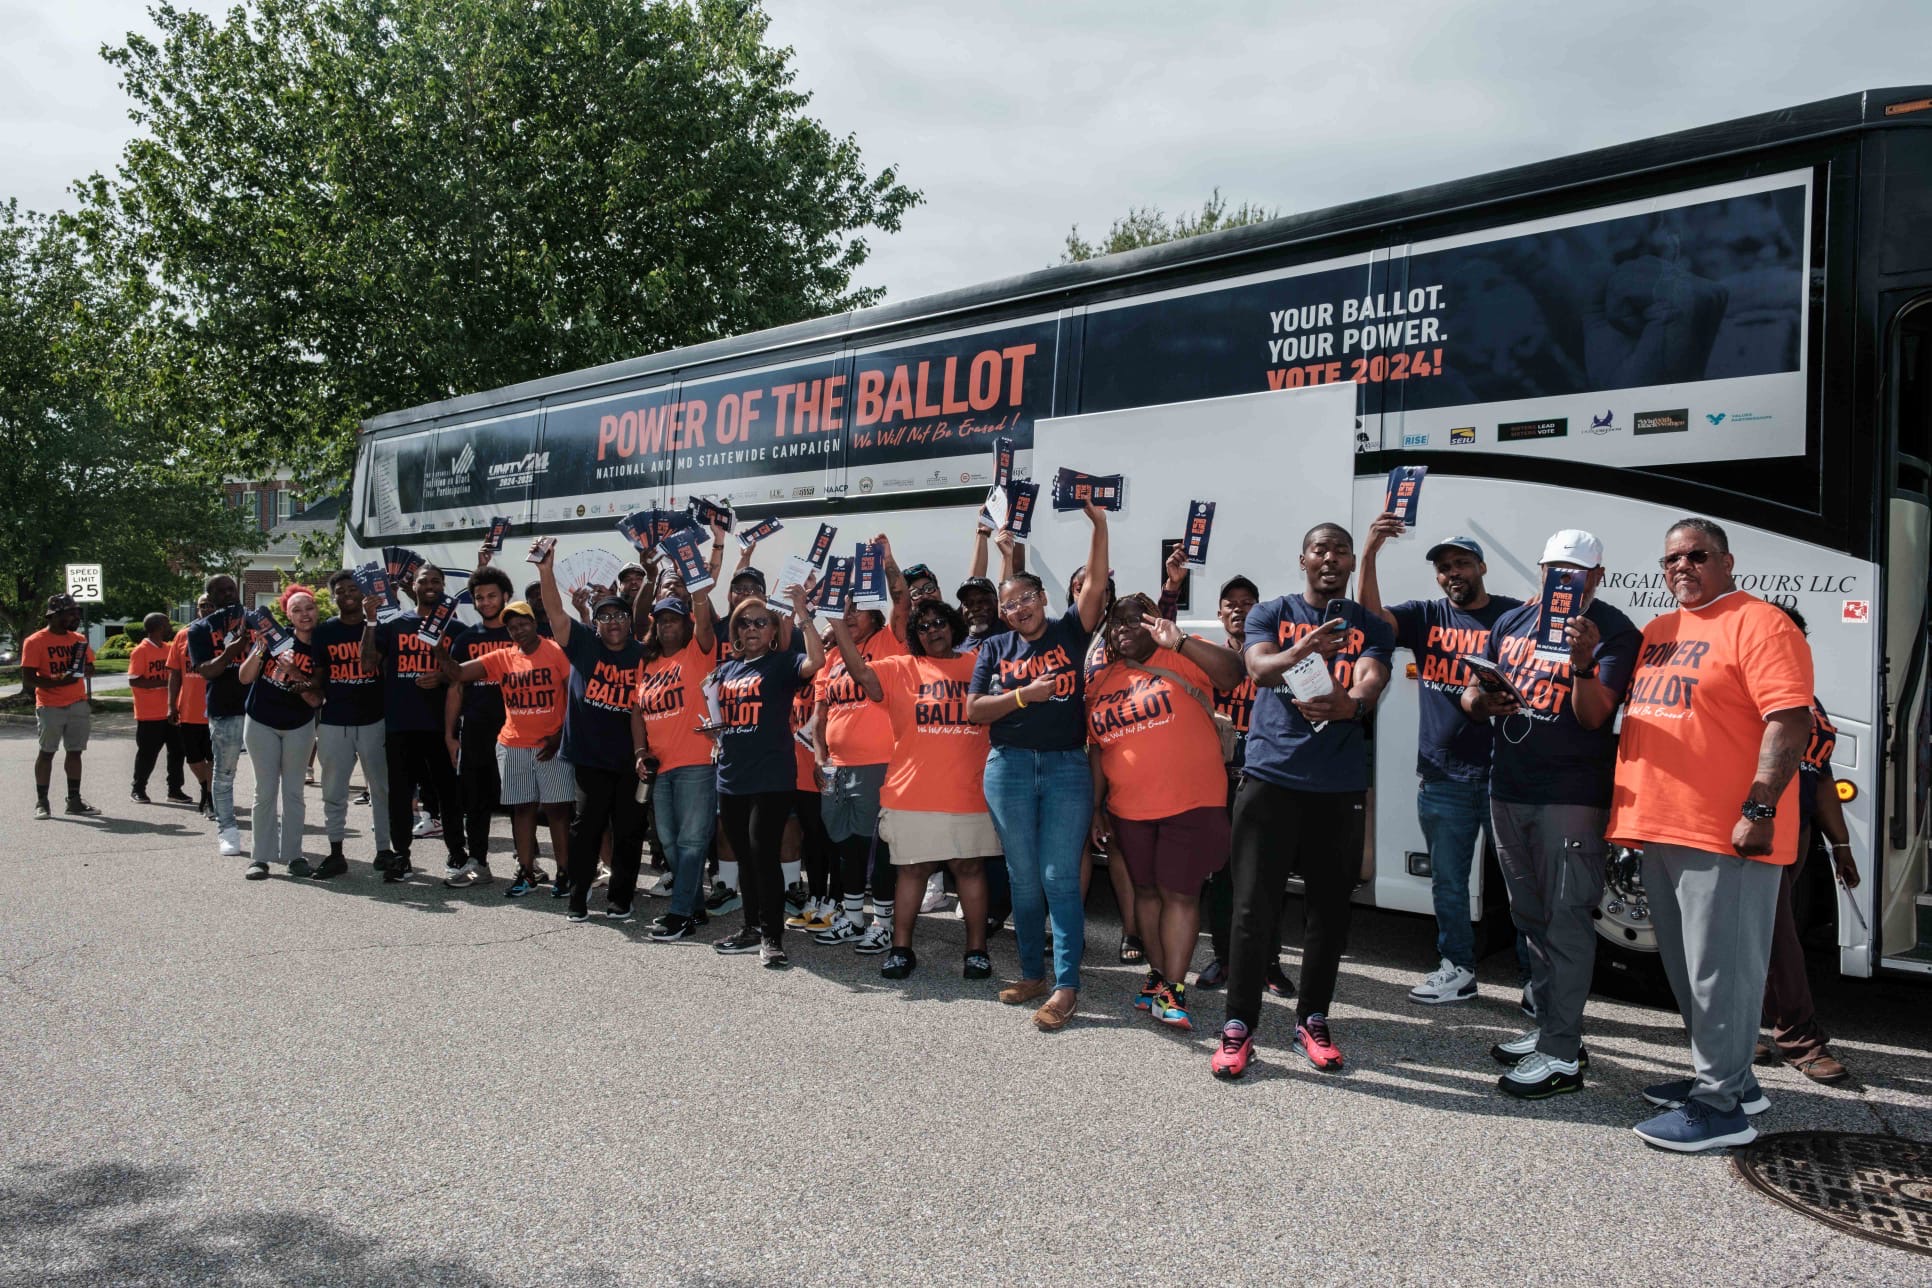 NCBCP Unity 2024 “Power of the Ballot” National Campaign and Tour, Mobilized Voters for Maryland Early Voting and Presidential Primary Election